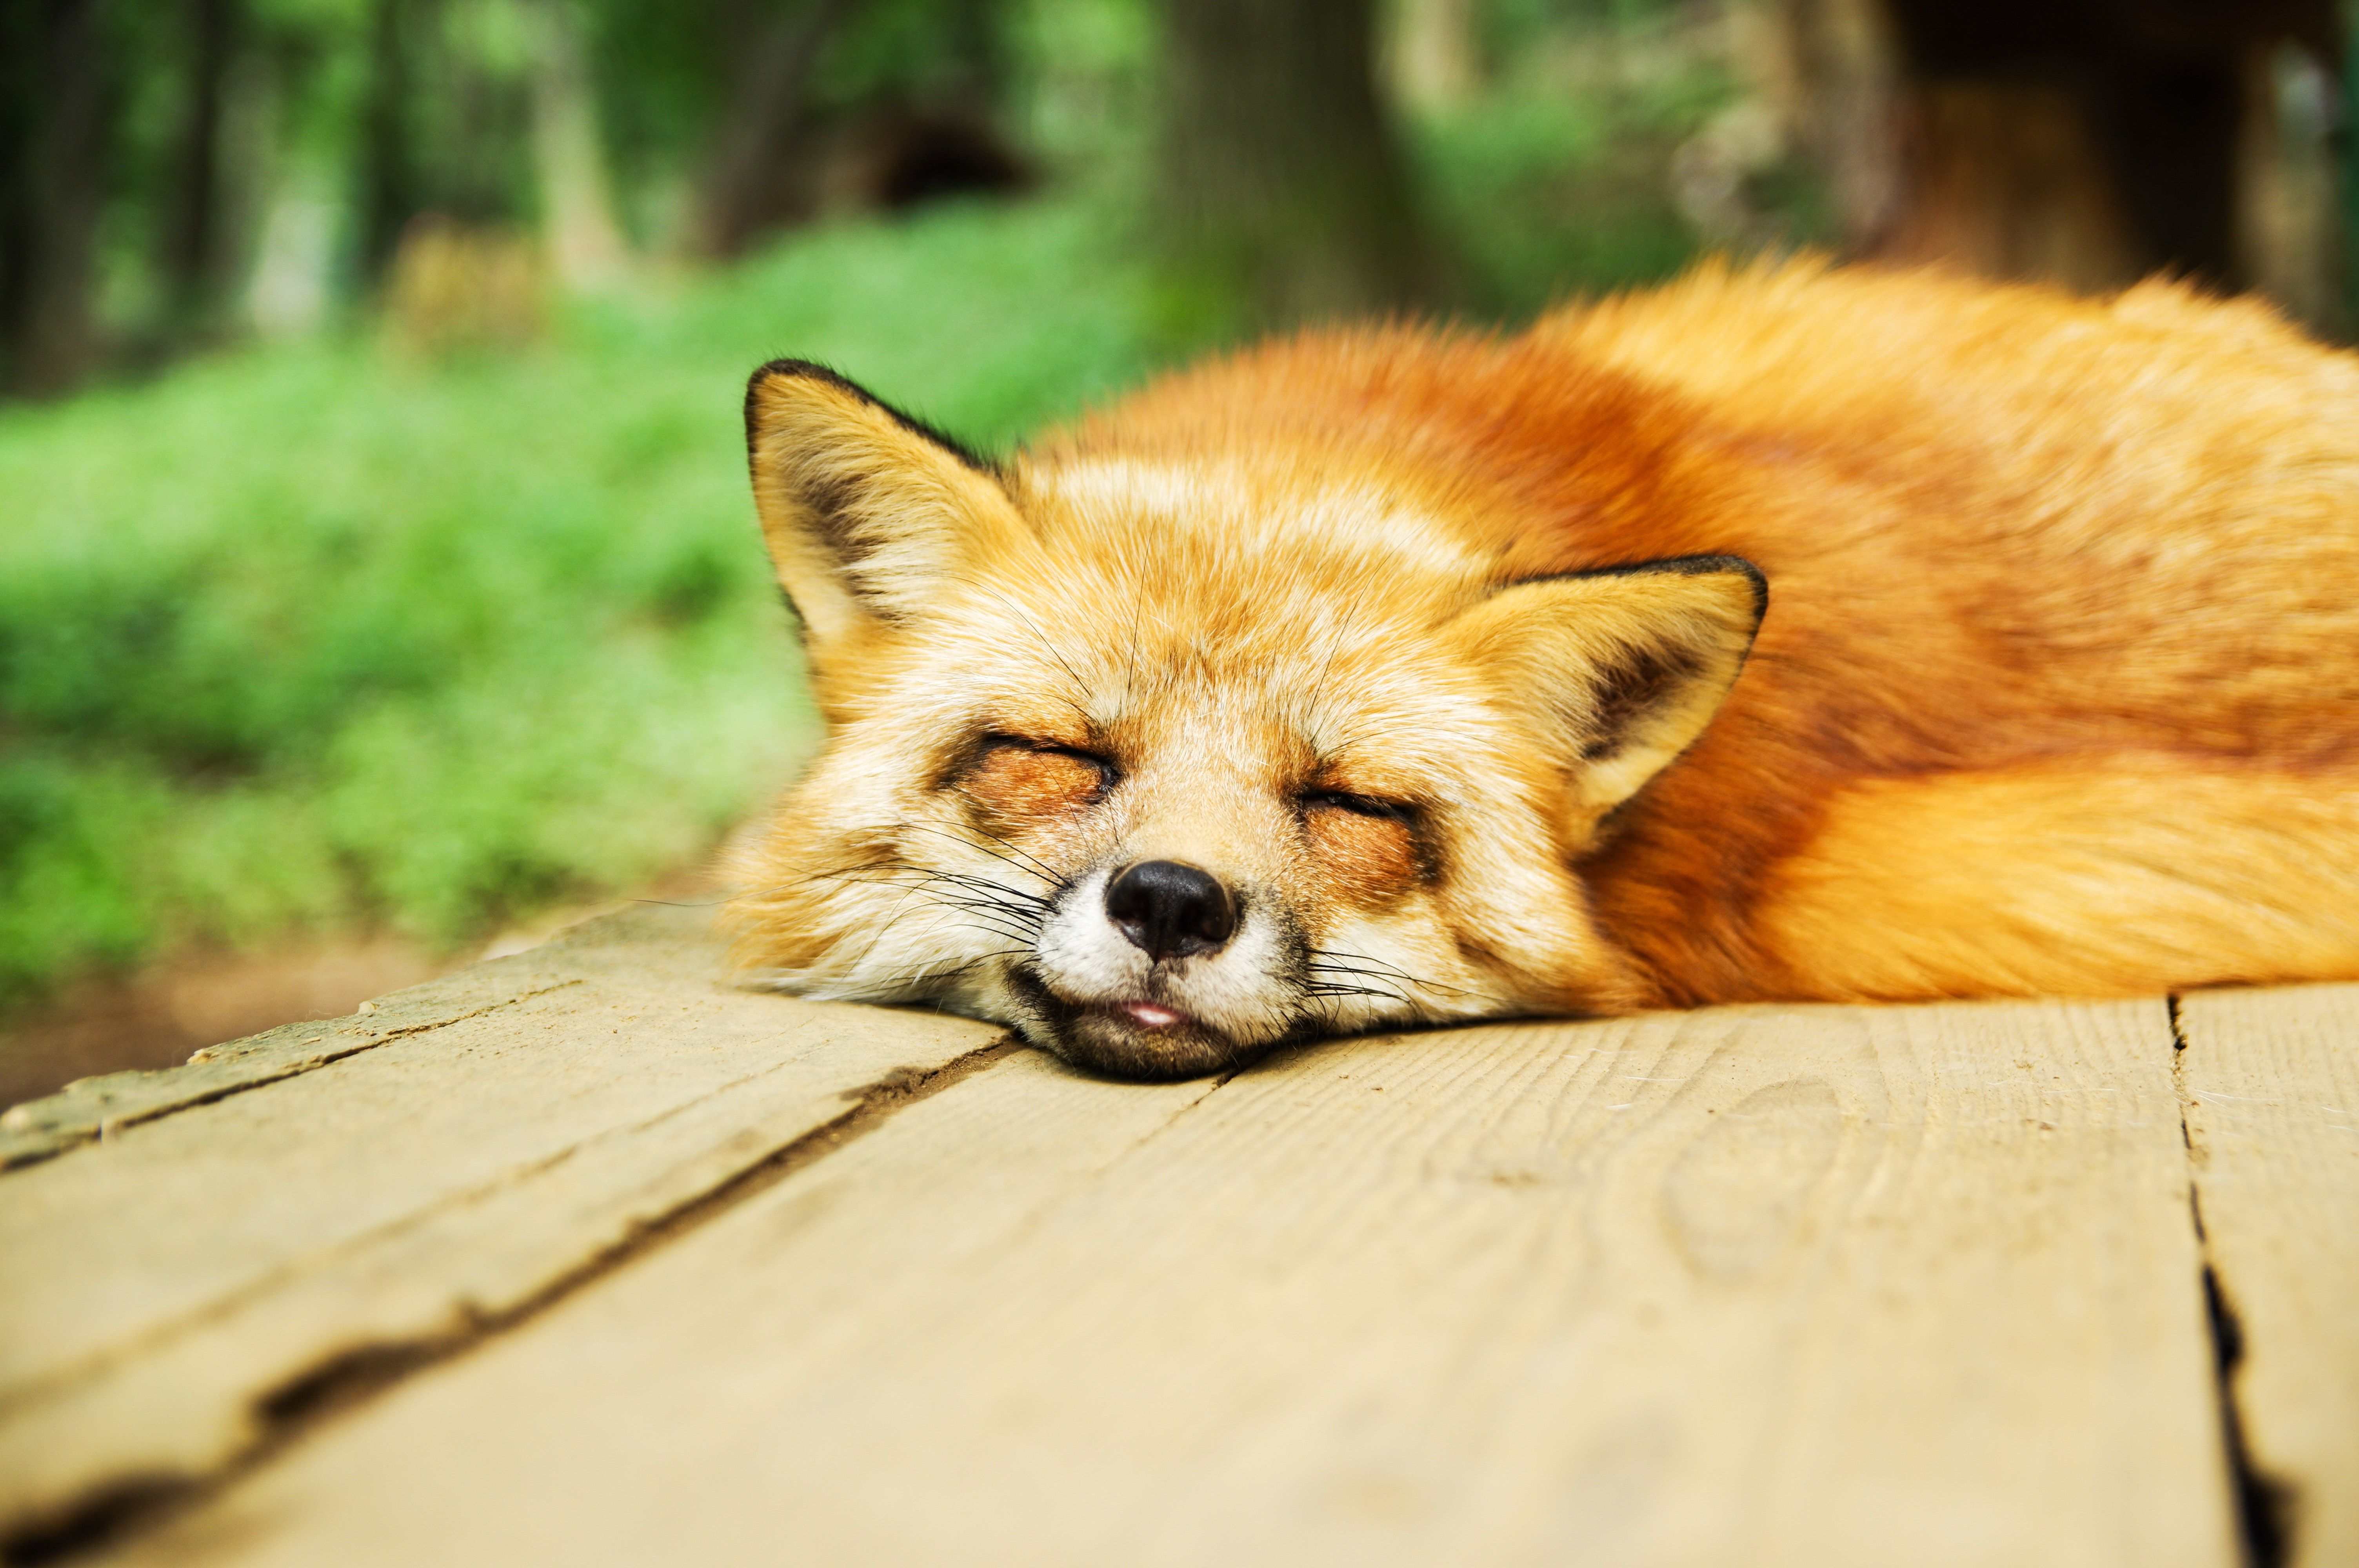 A red fox napping on a porch.